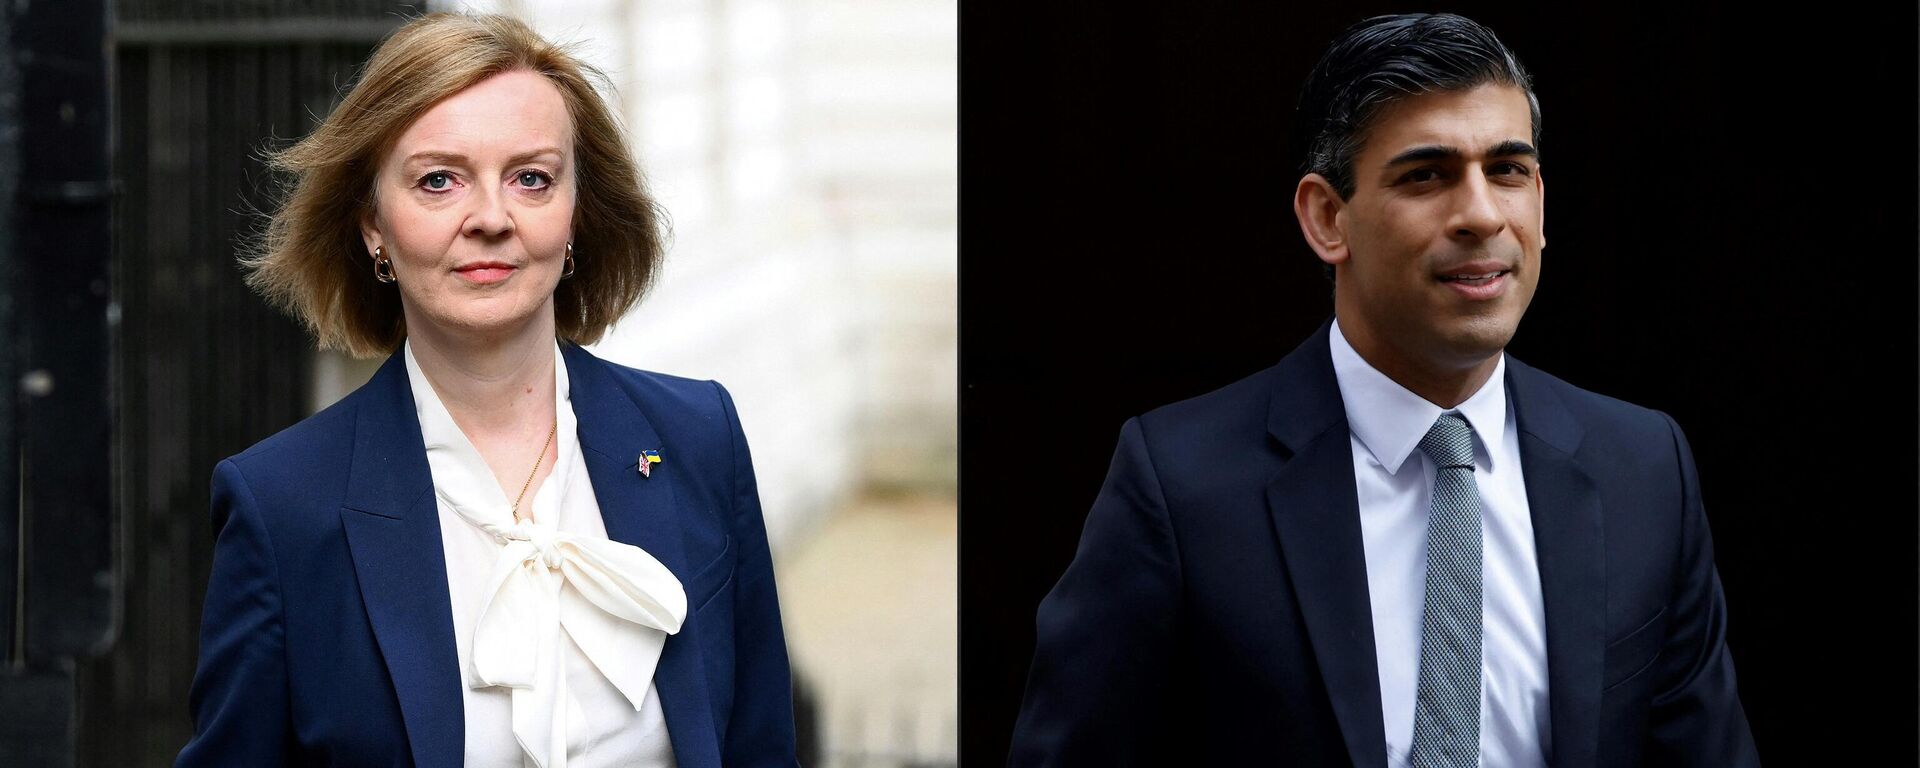 (COMBO) This combination of pictures created on July 12, 2022 shows Britain's Foreign Secretary Liz Truss (L) arriving to attend the weekly Cabinet meeting at 10 Downing Street, in London, on April 19, 2022 and Britain's Chancellor of the Exchequer Rishi Sunak leaving the 11 Downing Street, in London, on March 23, 2022.  - Sputnik International, 1920, 25.07.2022